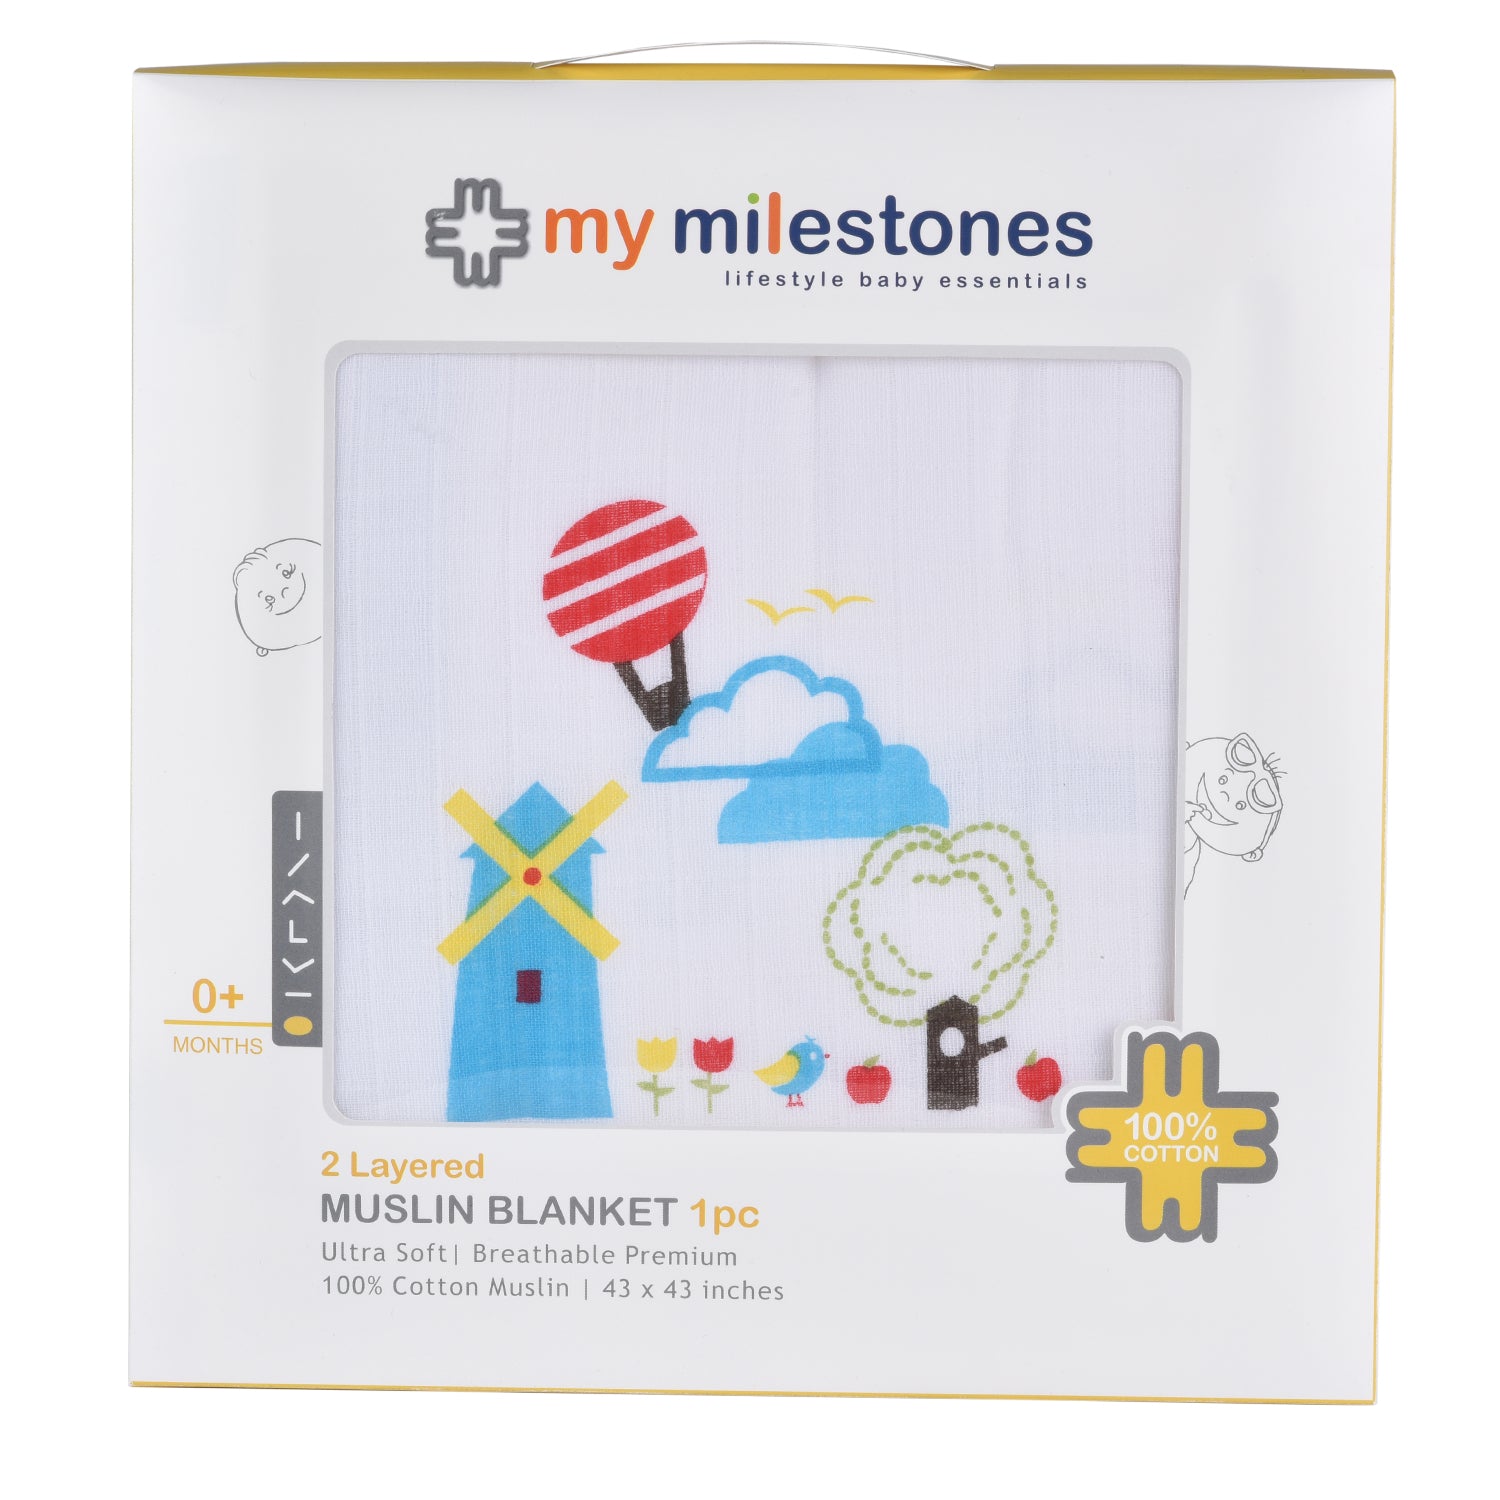 My Milestones 100% Cotton Muslin Baby Blanket - 4 Layered (43x43 inches) - Dutch Country Blue